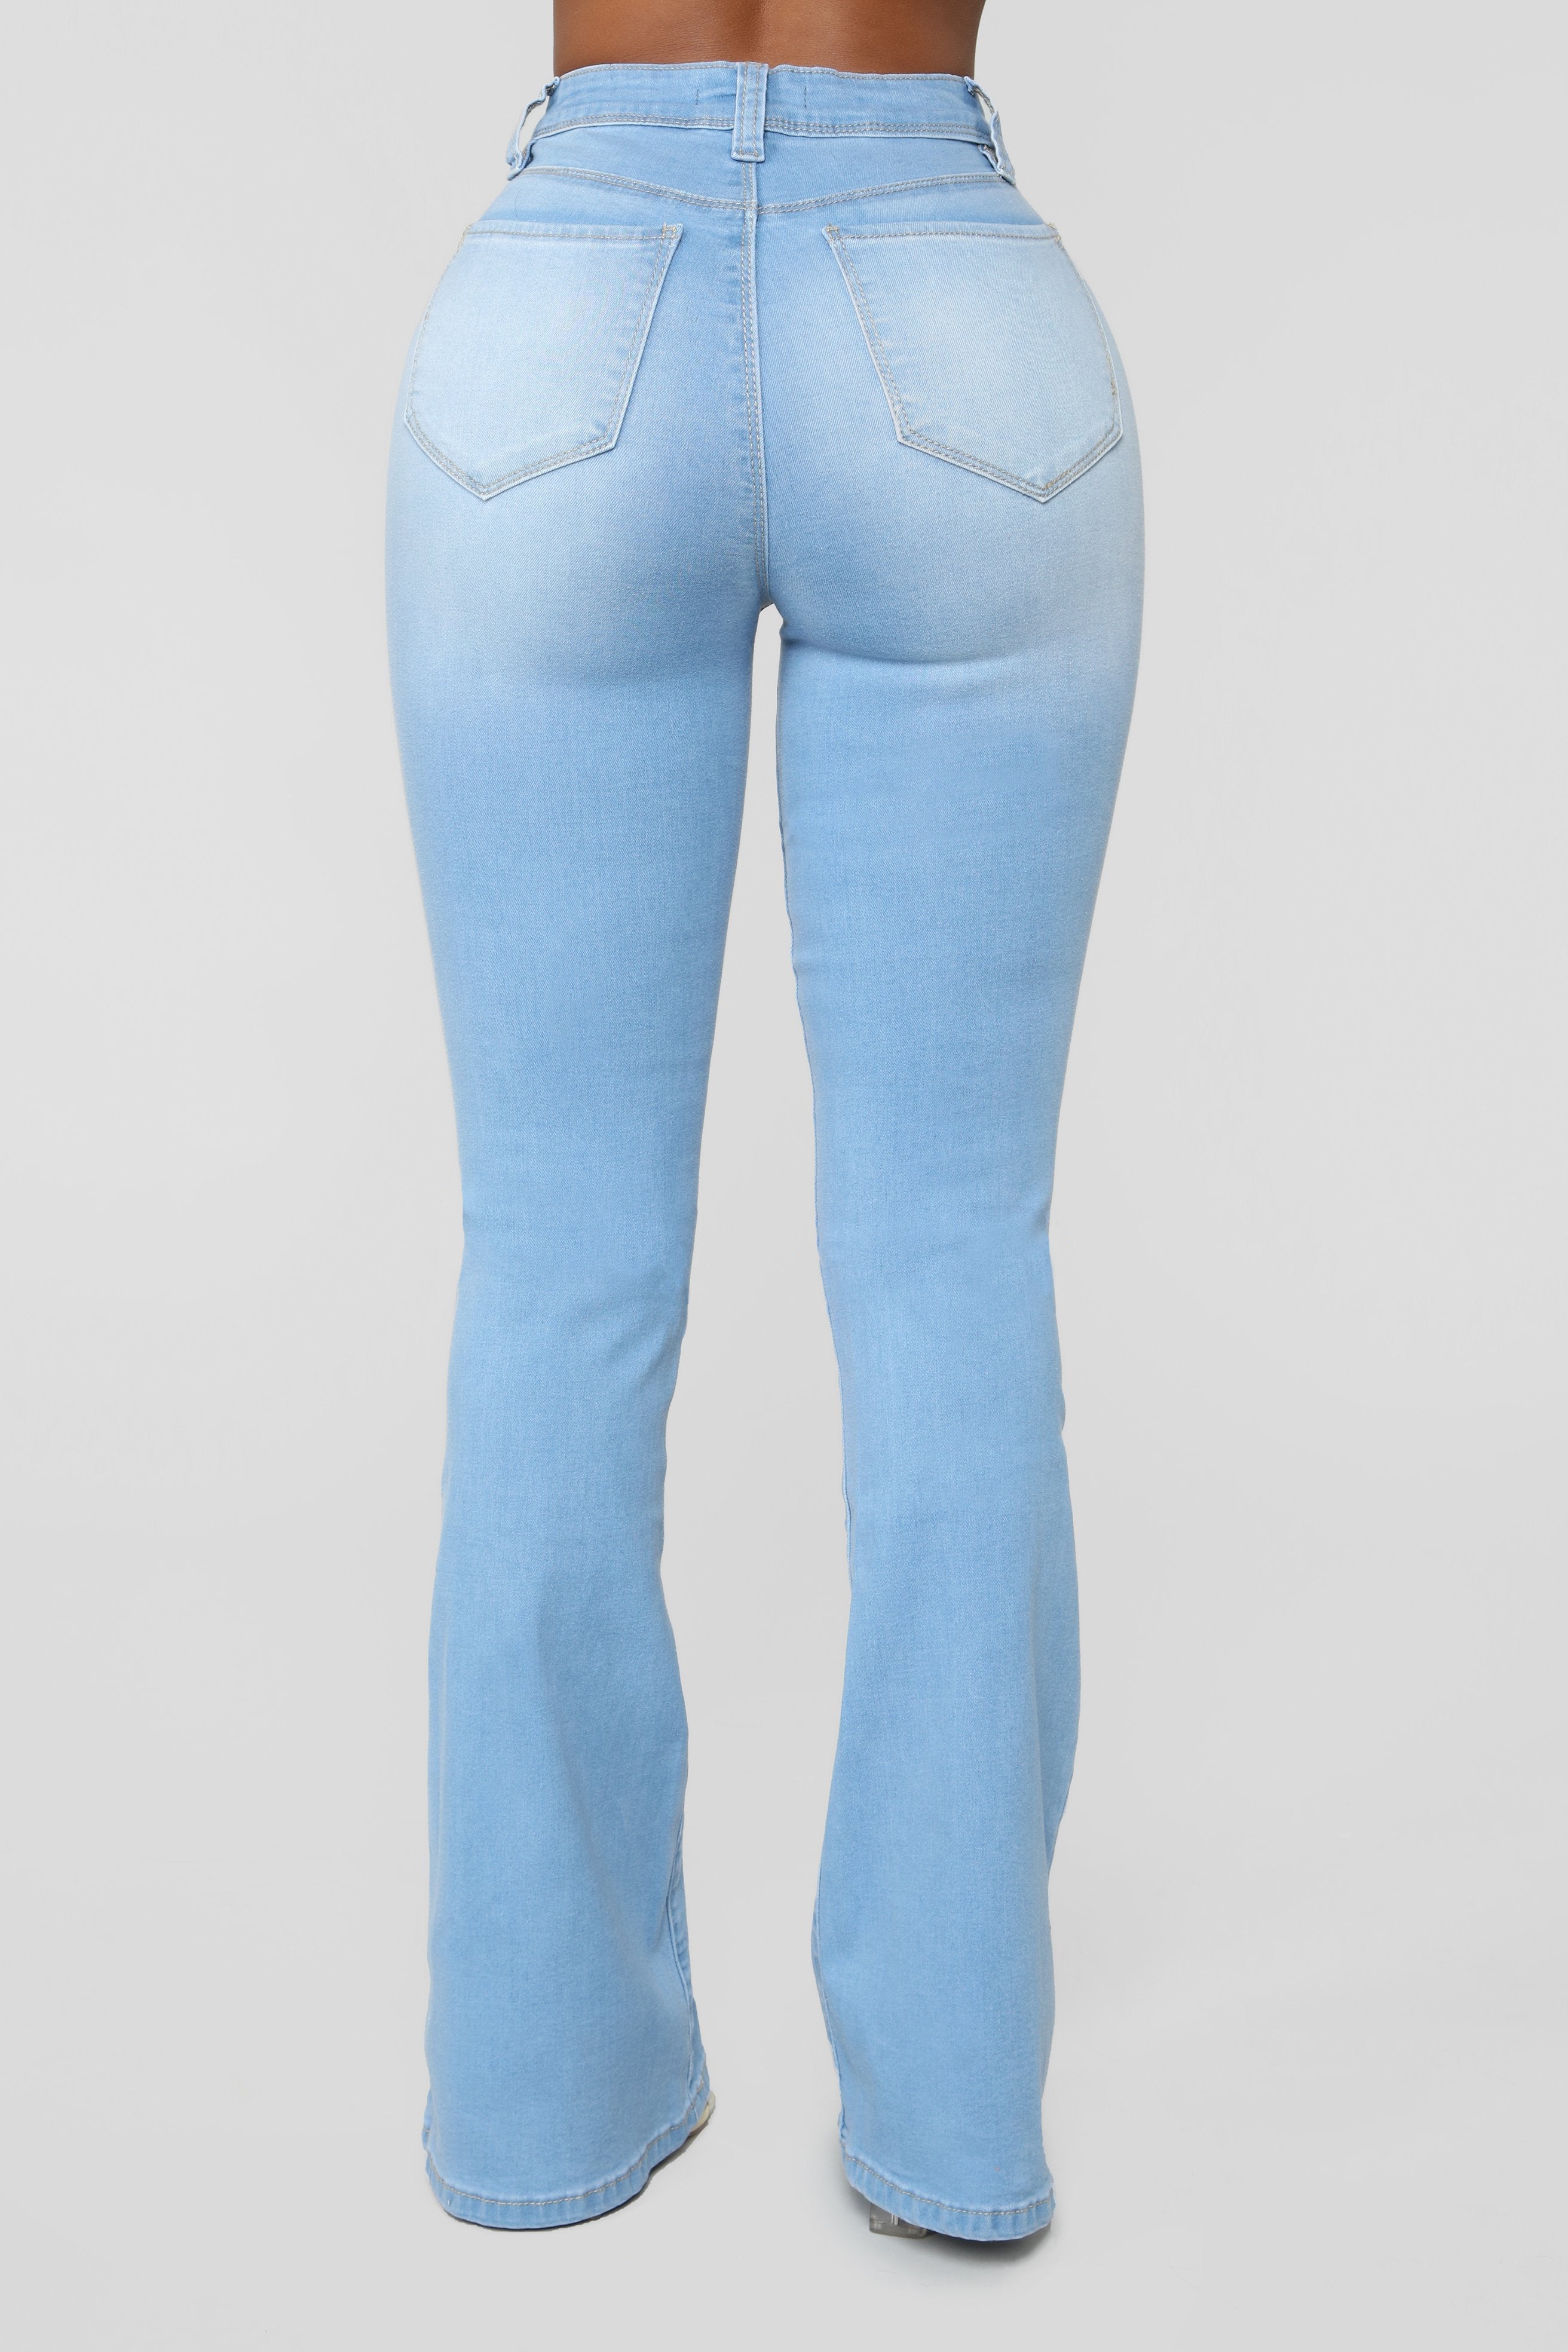 Jodie High Rise Flare Jeans - Light Blue Wash